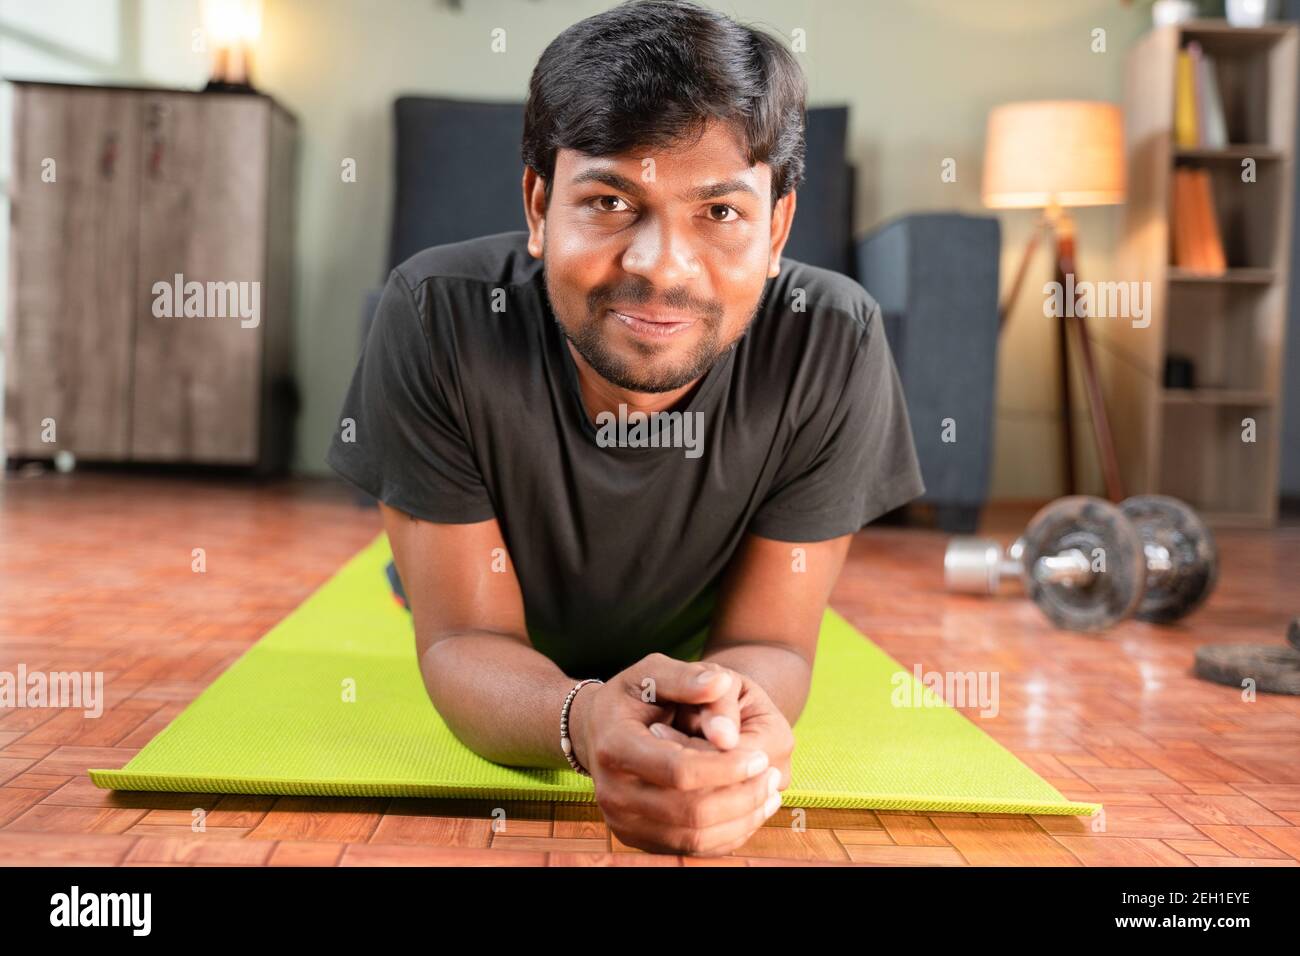 Young man with smiling face on yoga mat at home after working out looking camera, concept of home gym, new normal lifetyle, health and fitness. Stock Photo